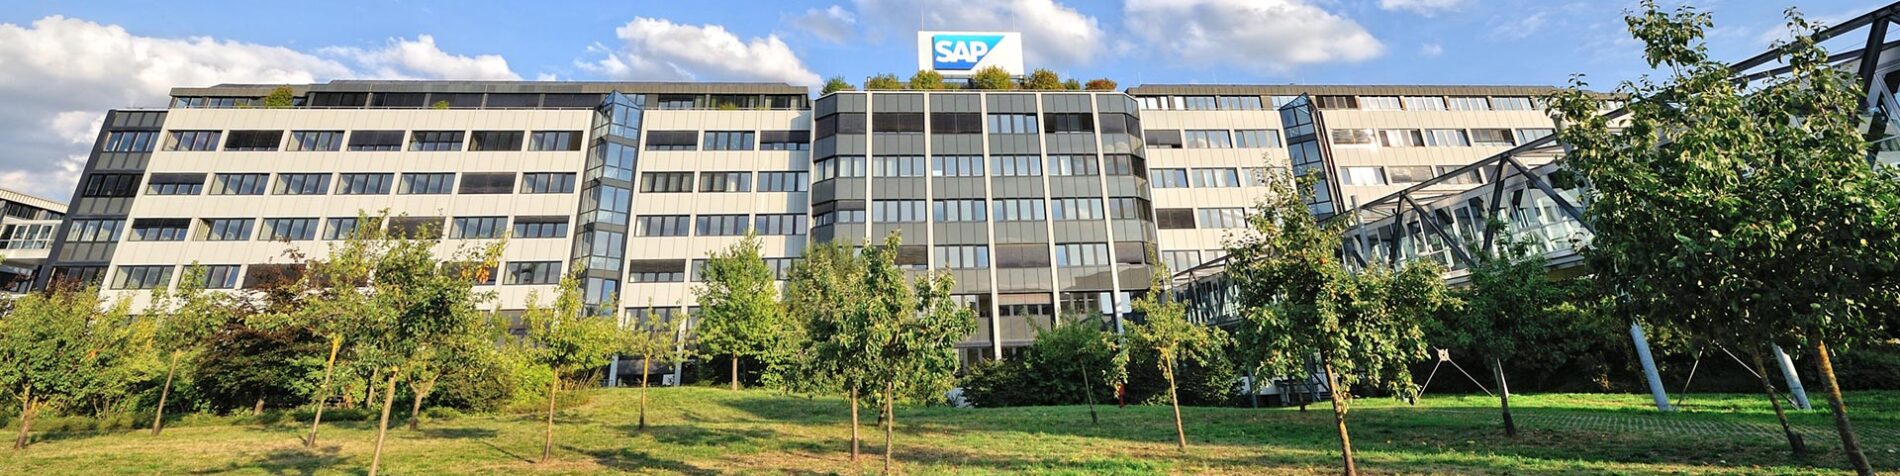 SAP Supervisory Board Extends Contracts with Executive Board Members Julia White and Scott Russell – Sabine Bendiek to End Her Contract December 31, 2023